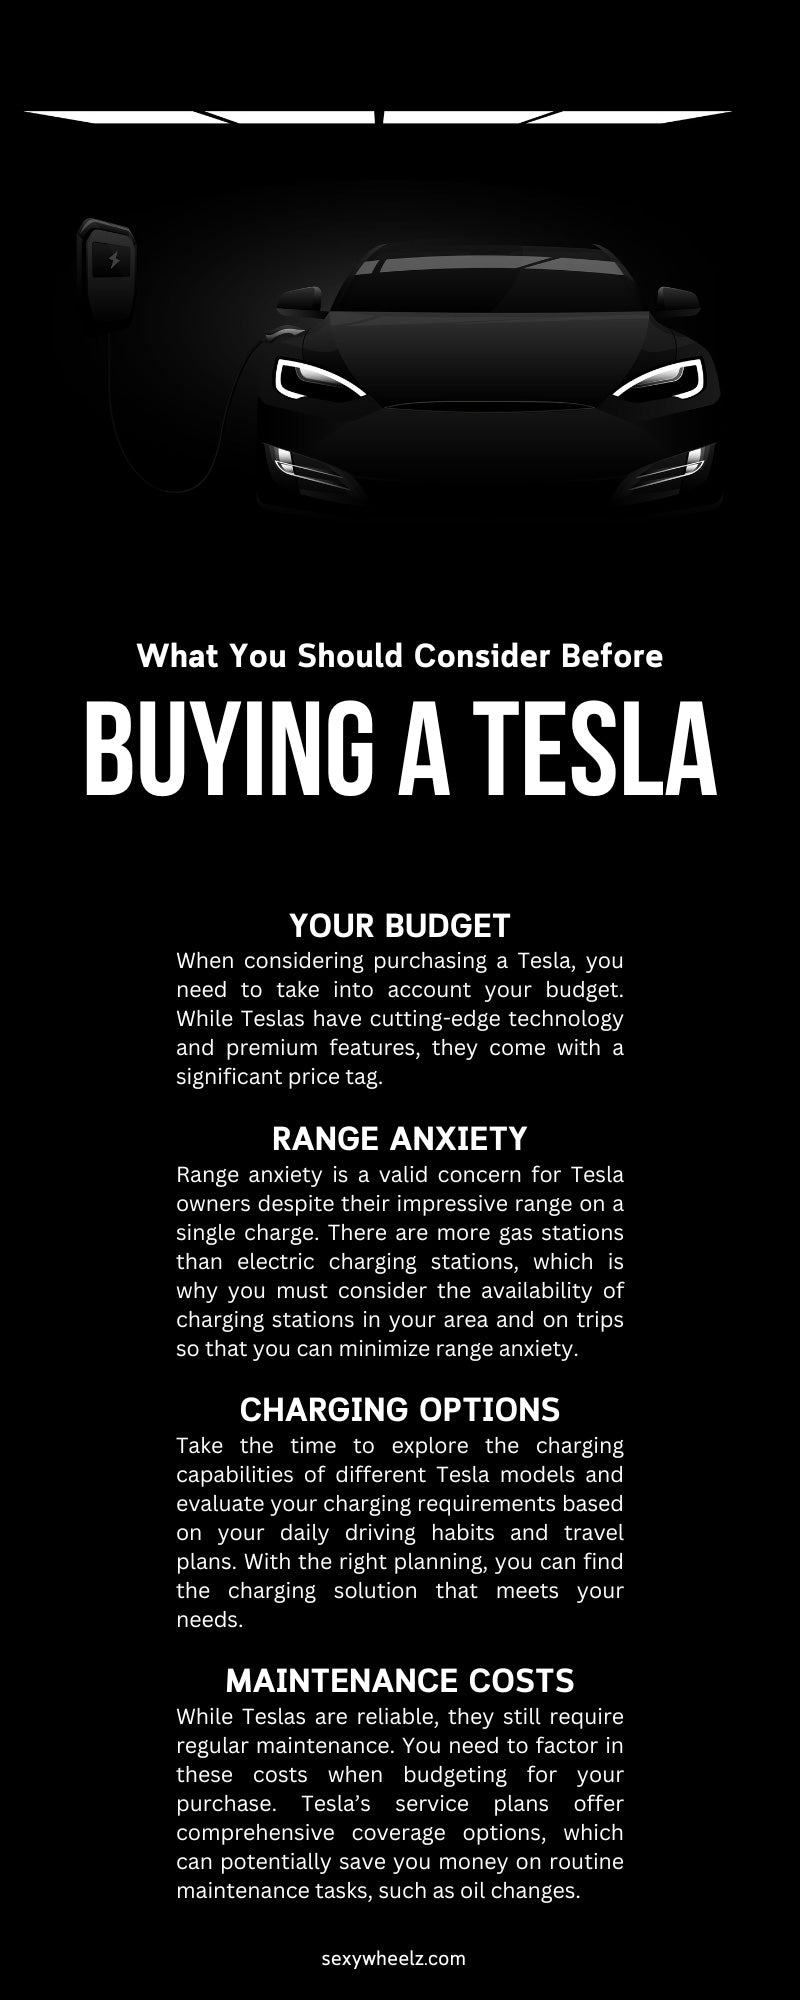 What You Should Consider Before Buying a Tesla